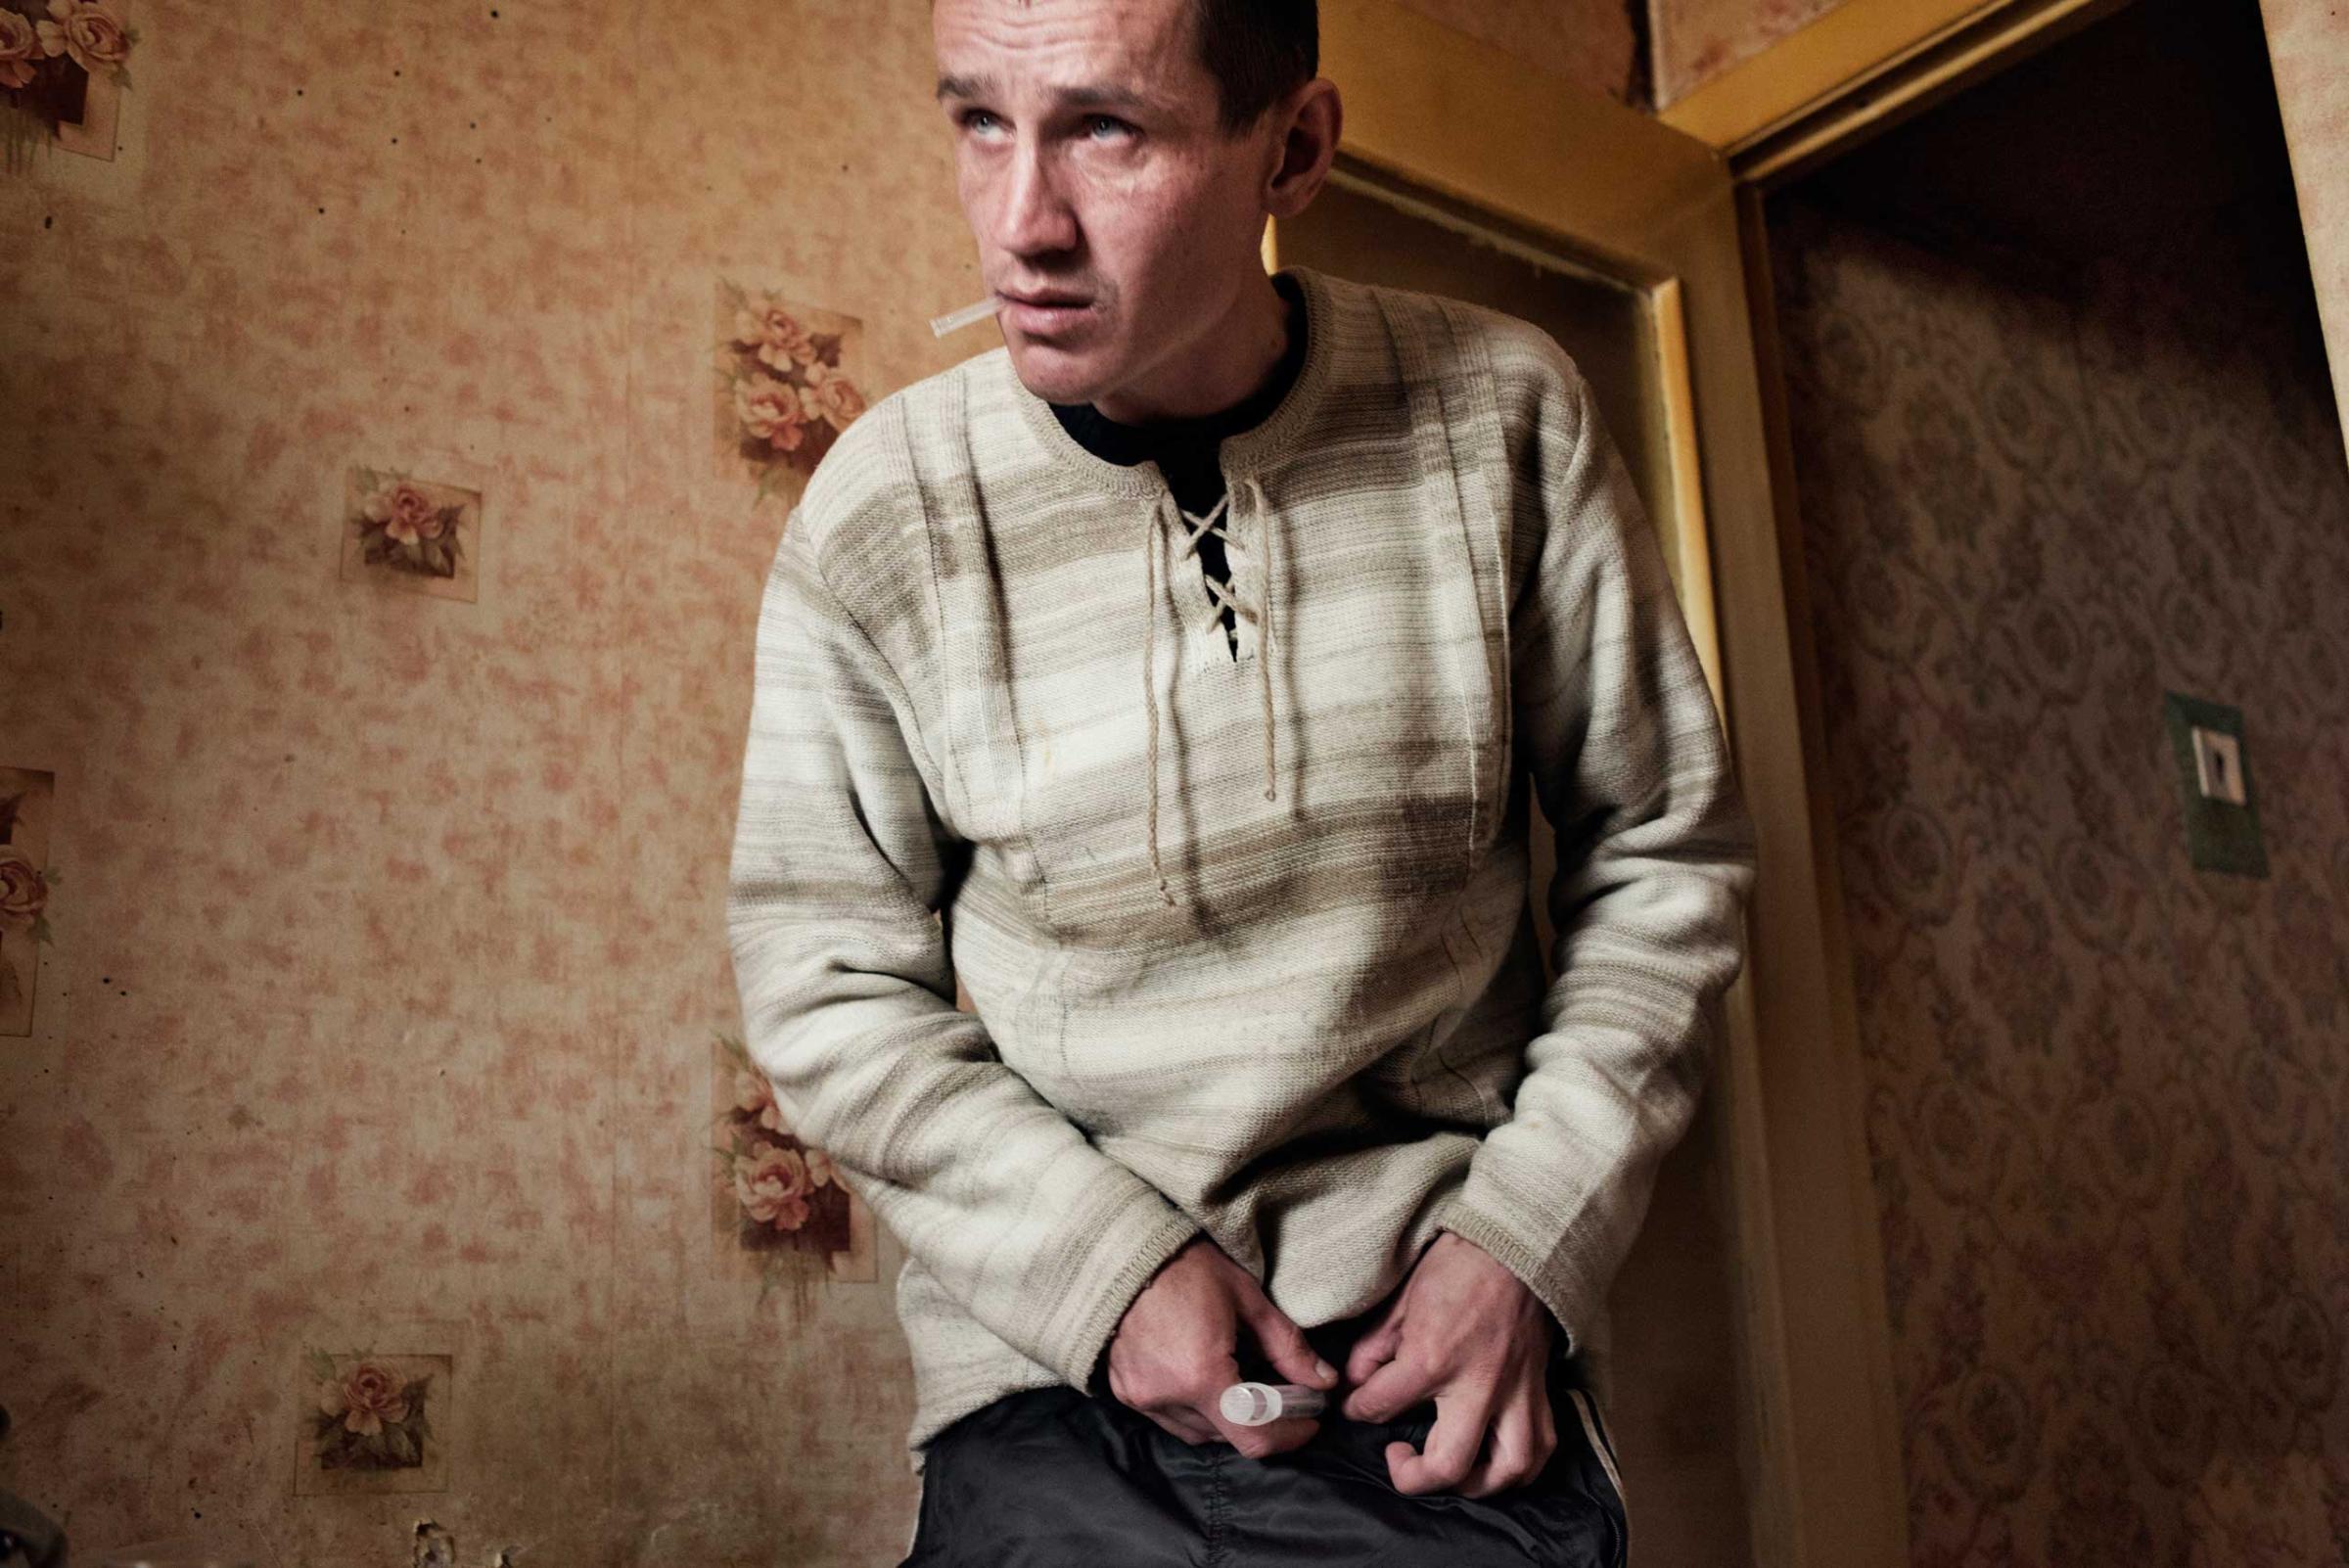 The following photographs were taken in Yekaterinburg, Russia in 2013.Alexei, age 33, injects a dose of krokodil. Because of his dependence on krokodil, Alexei has injuries and swelling around his feet and is forced to walk with a cane.